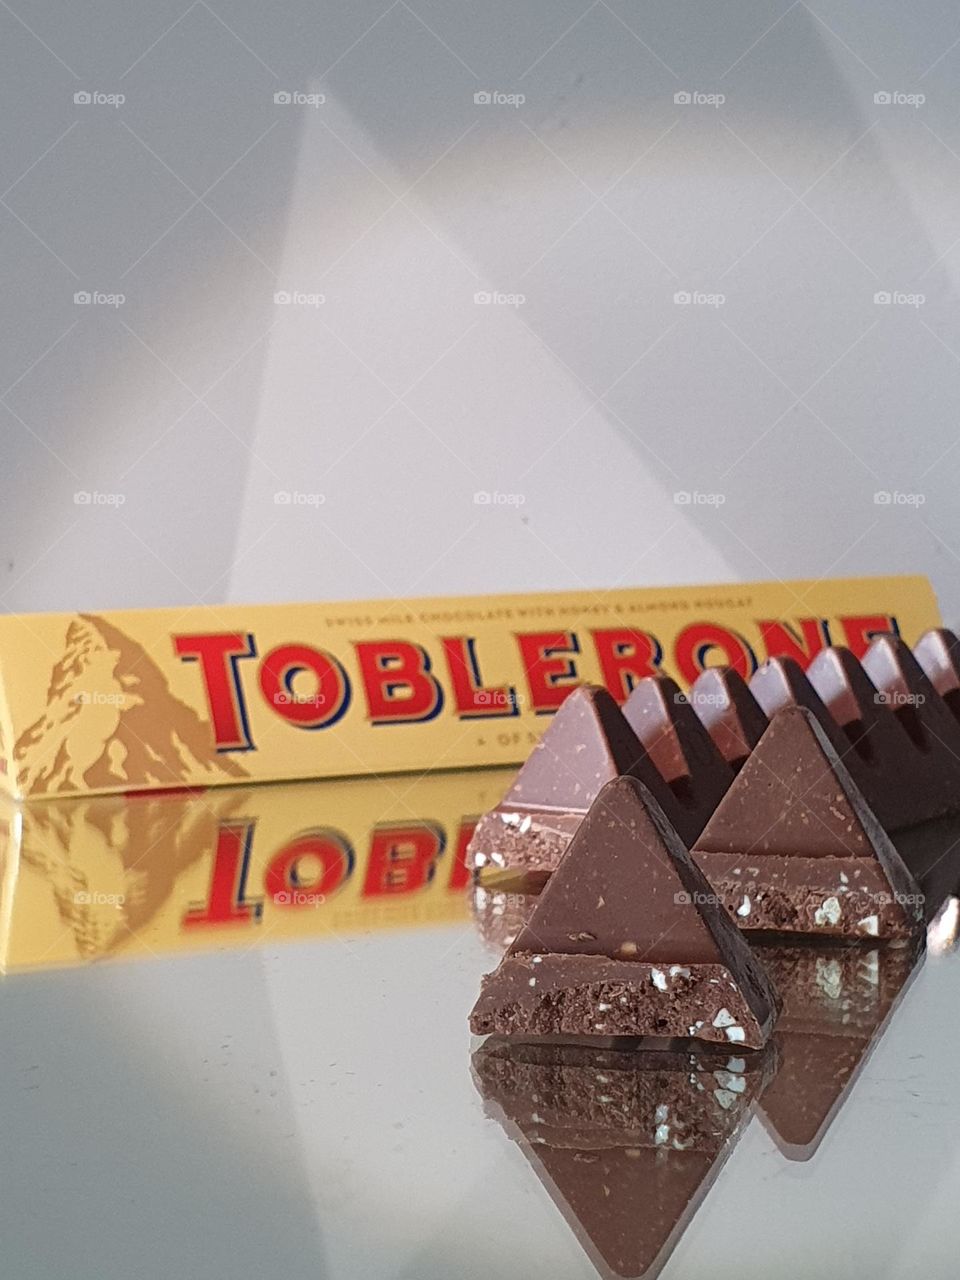 Triangle- Toblerone- triangular chocolate with almonds - see double